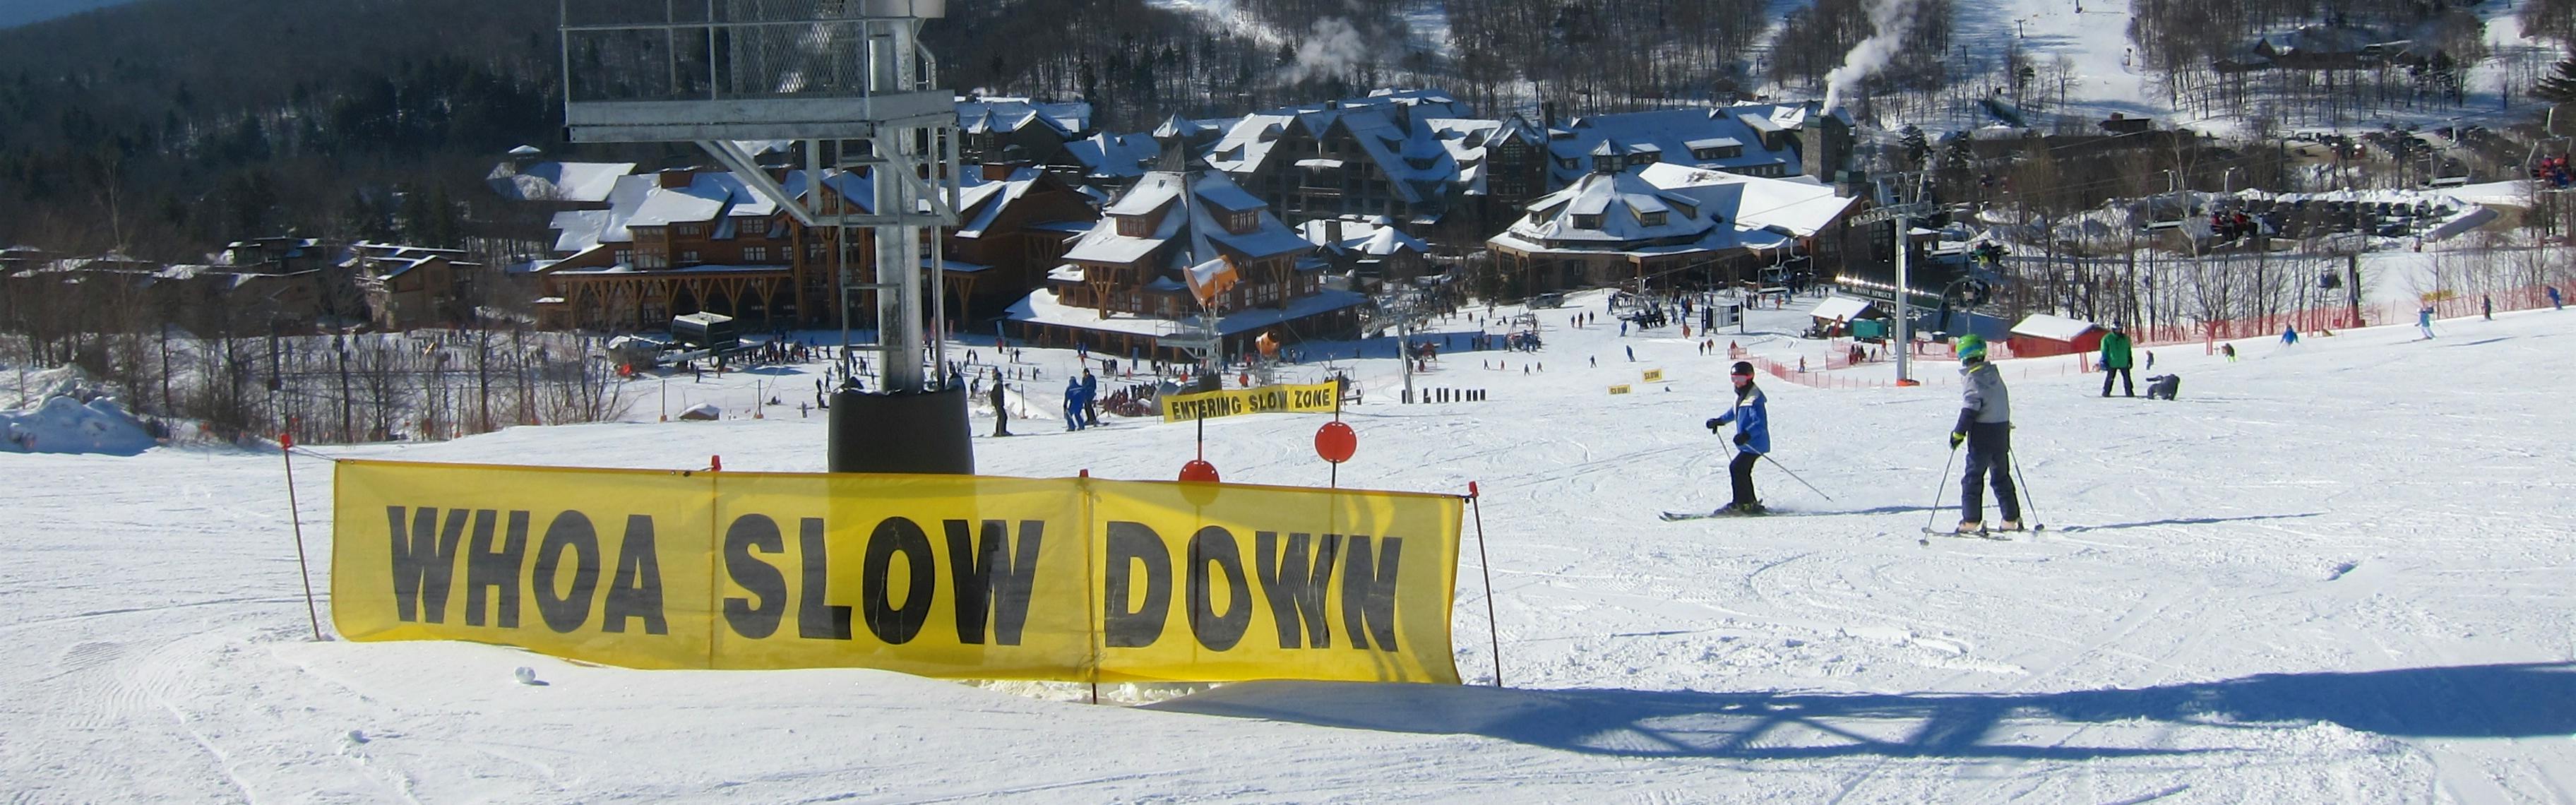 A large yellow sign at a ski resort reads "Woah Slow Down."